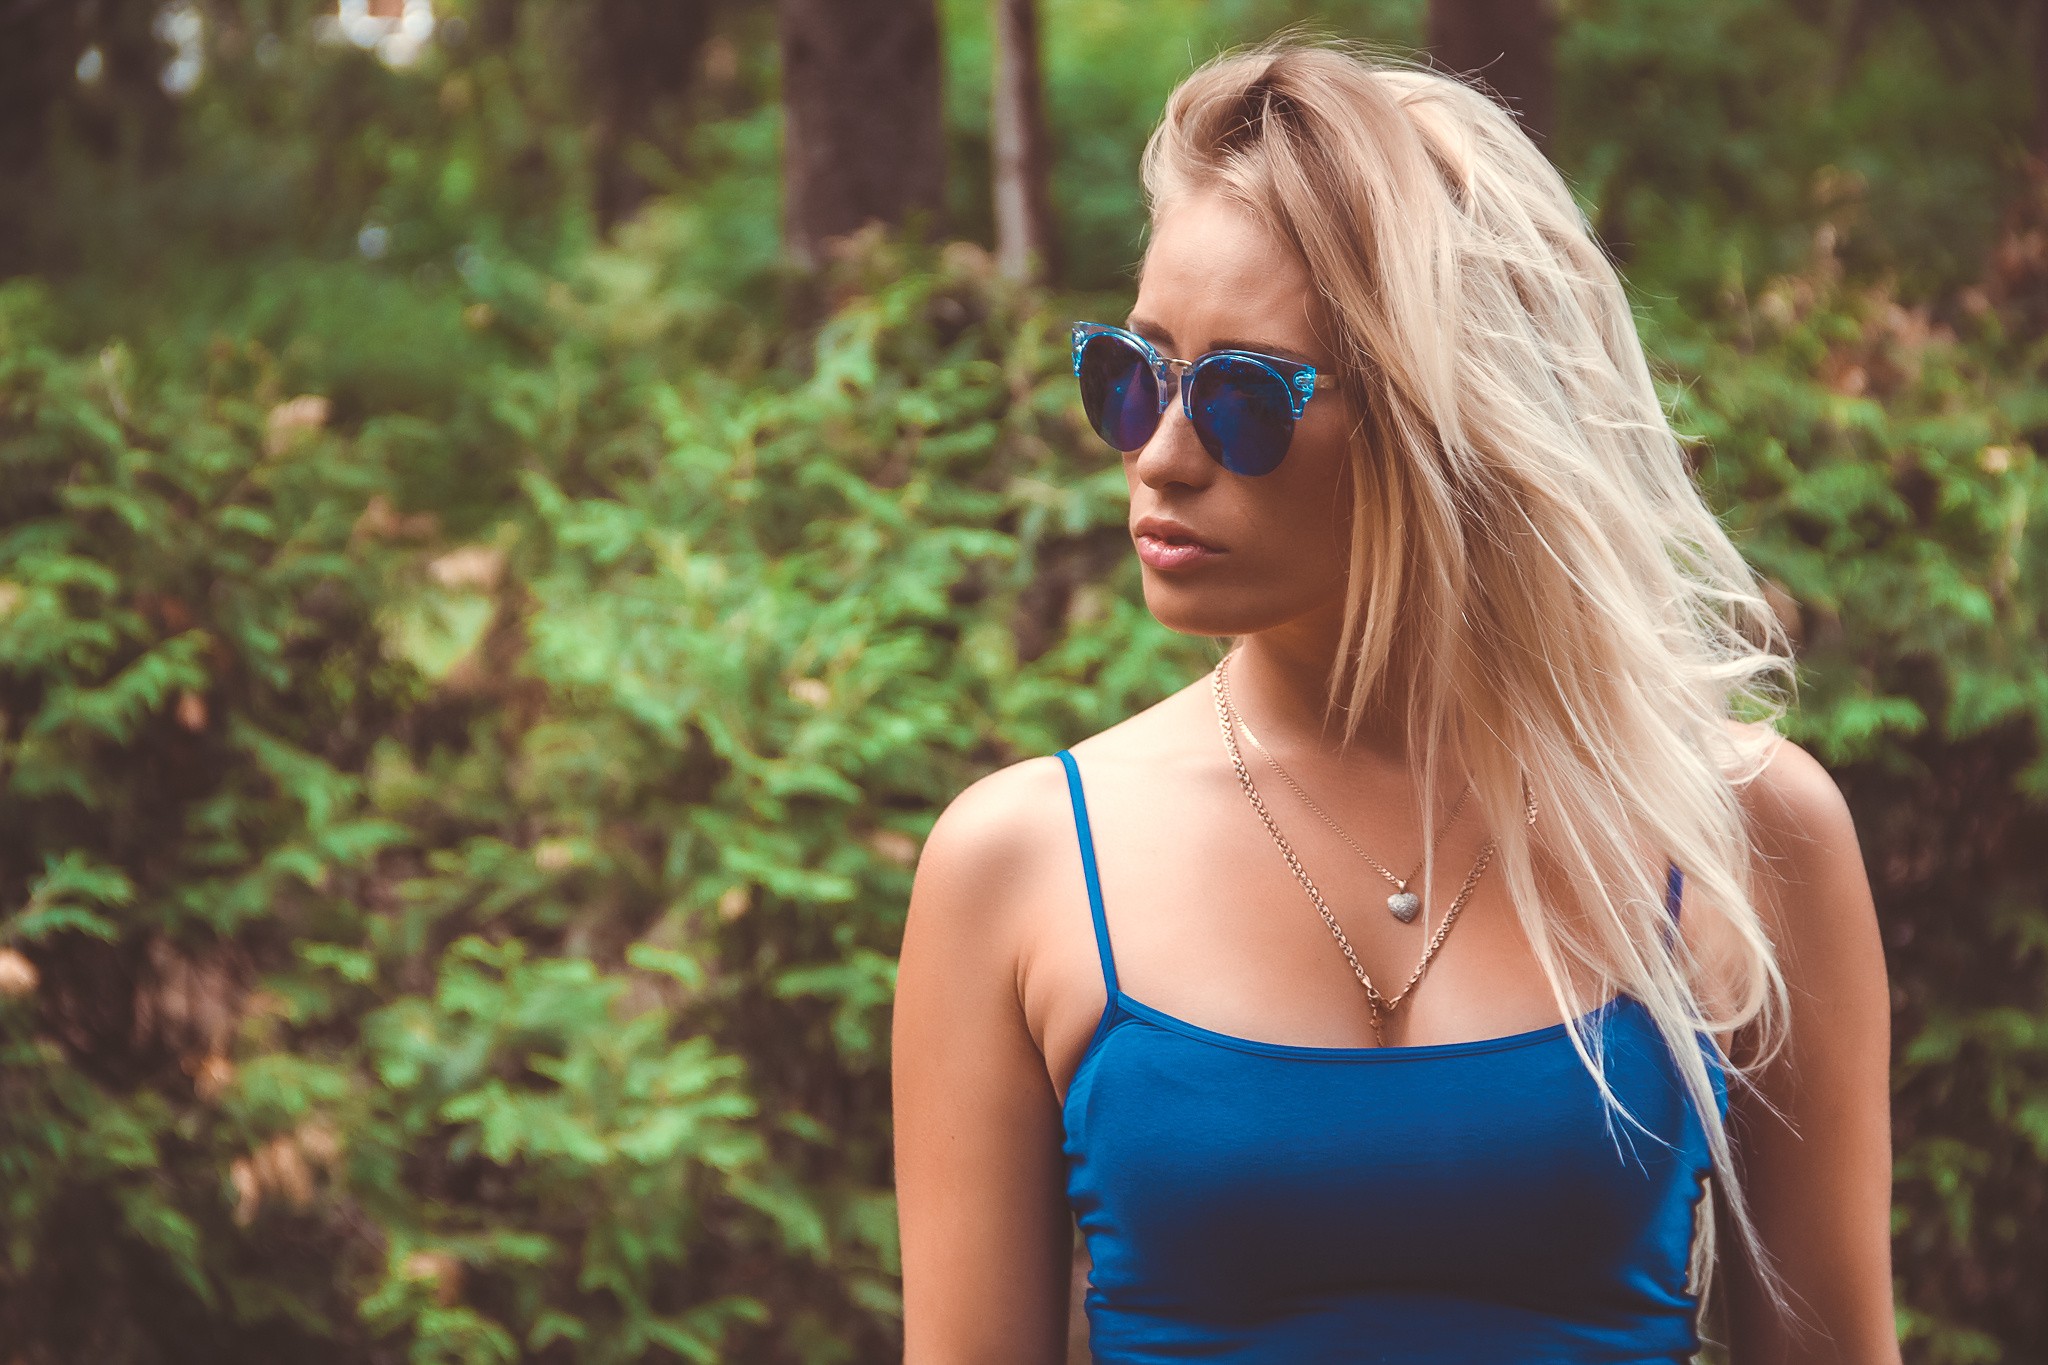 People 2048x1365 women model blonde face portrait women with glasses women outdoors sunglasses blue clothing blue tops women with shades heart necklace necklace long hair